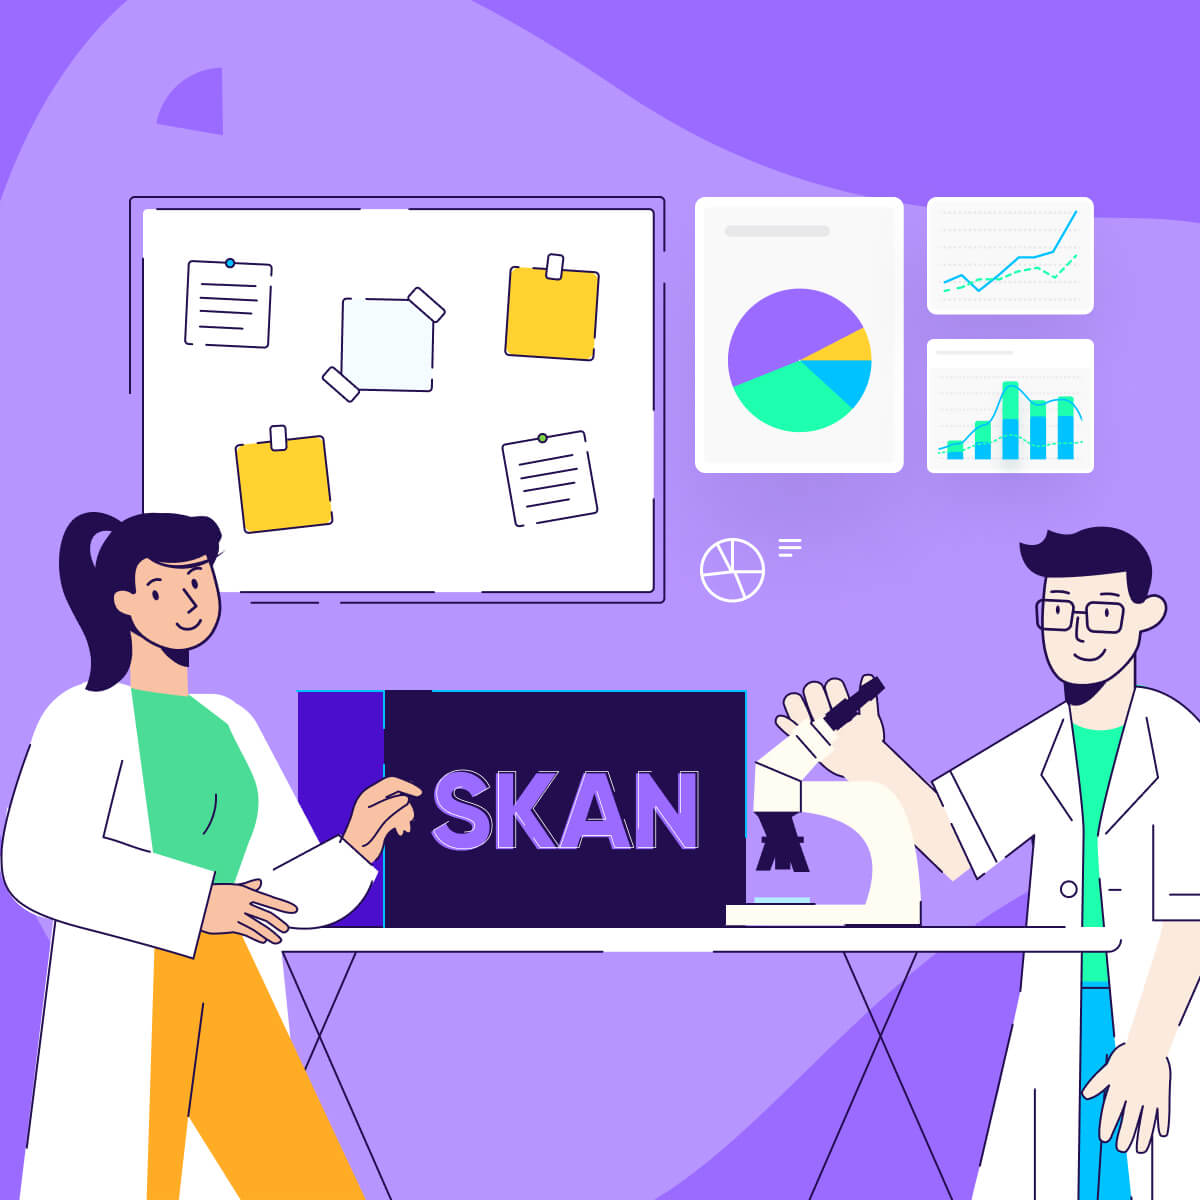 Does SKAN even work? - featured